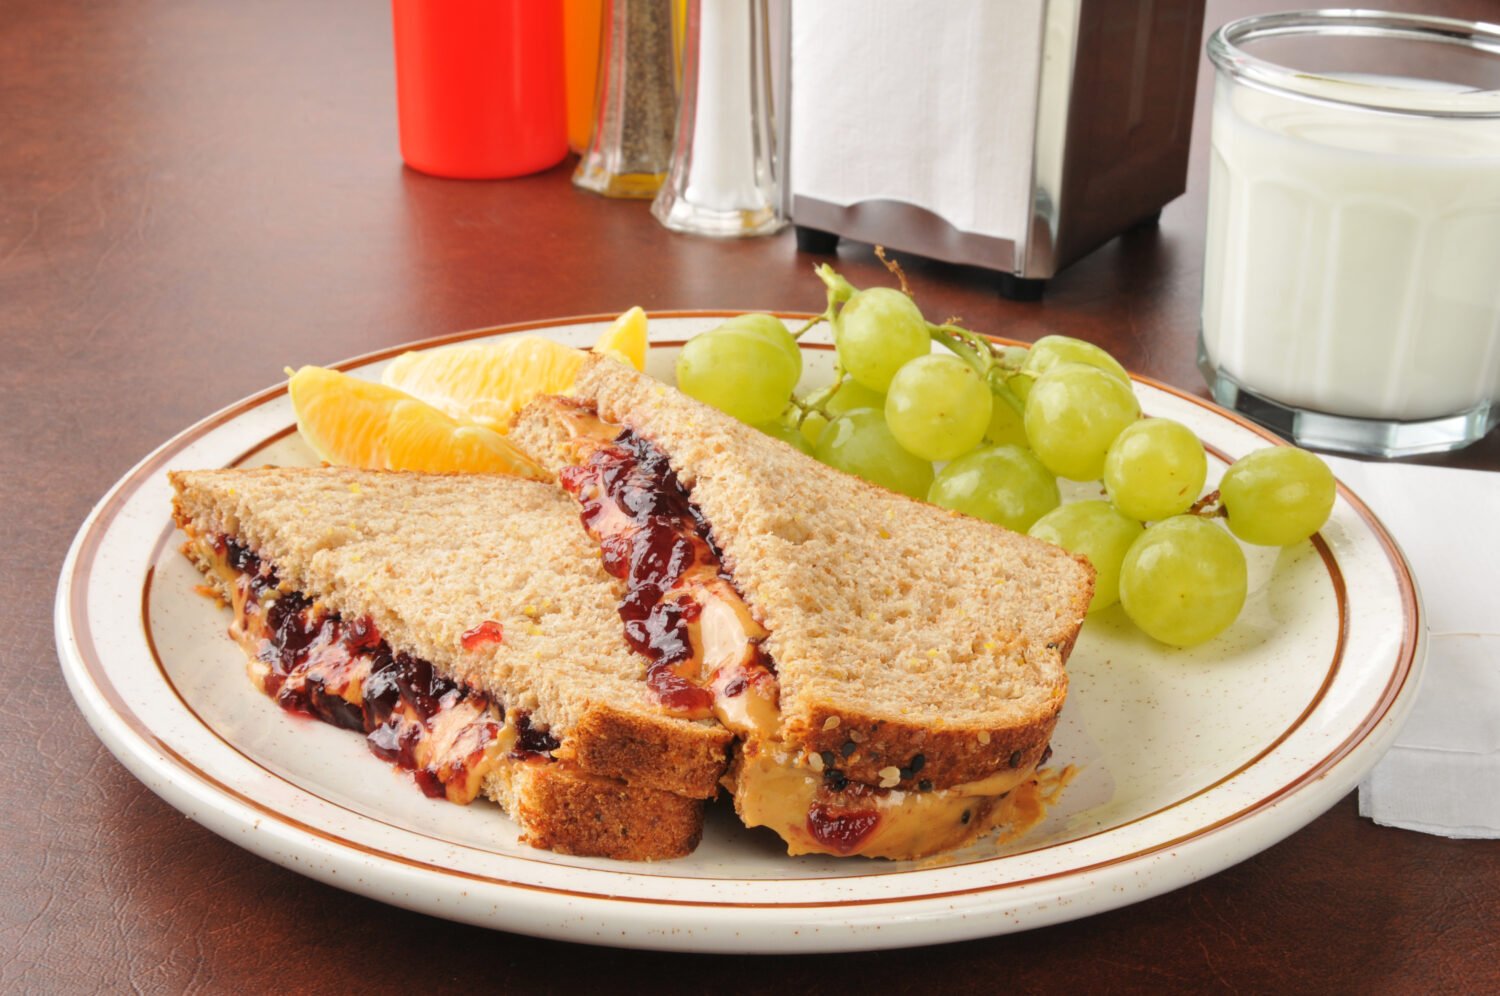 A peanut butter and jelly sandwich on whole wheat bread